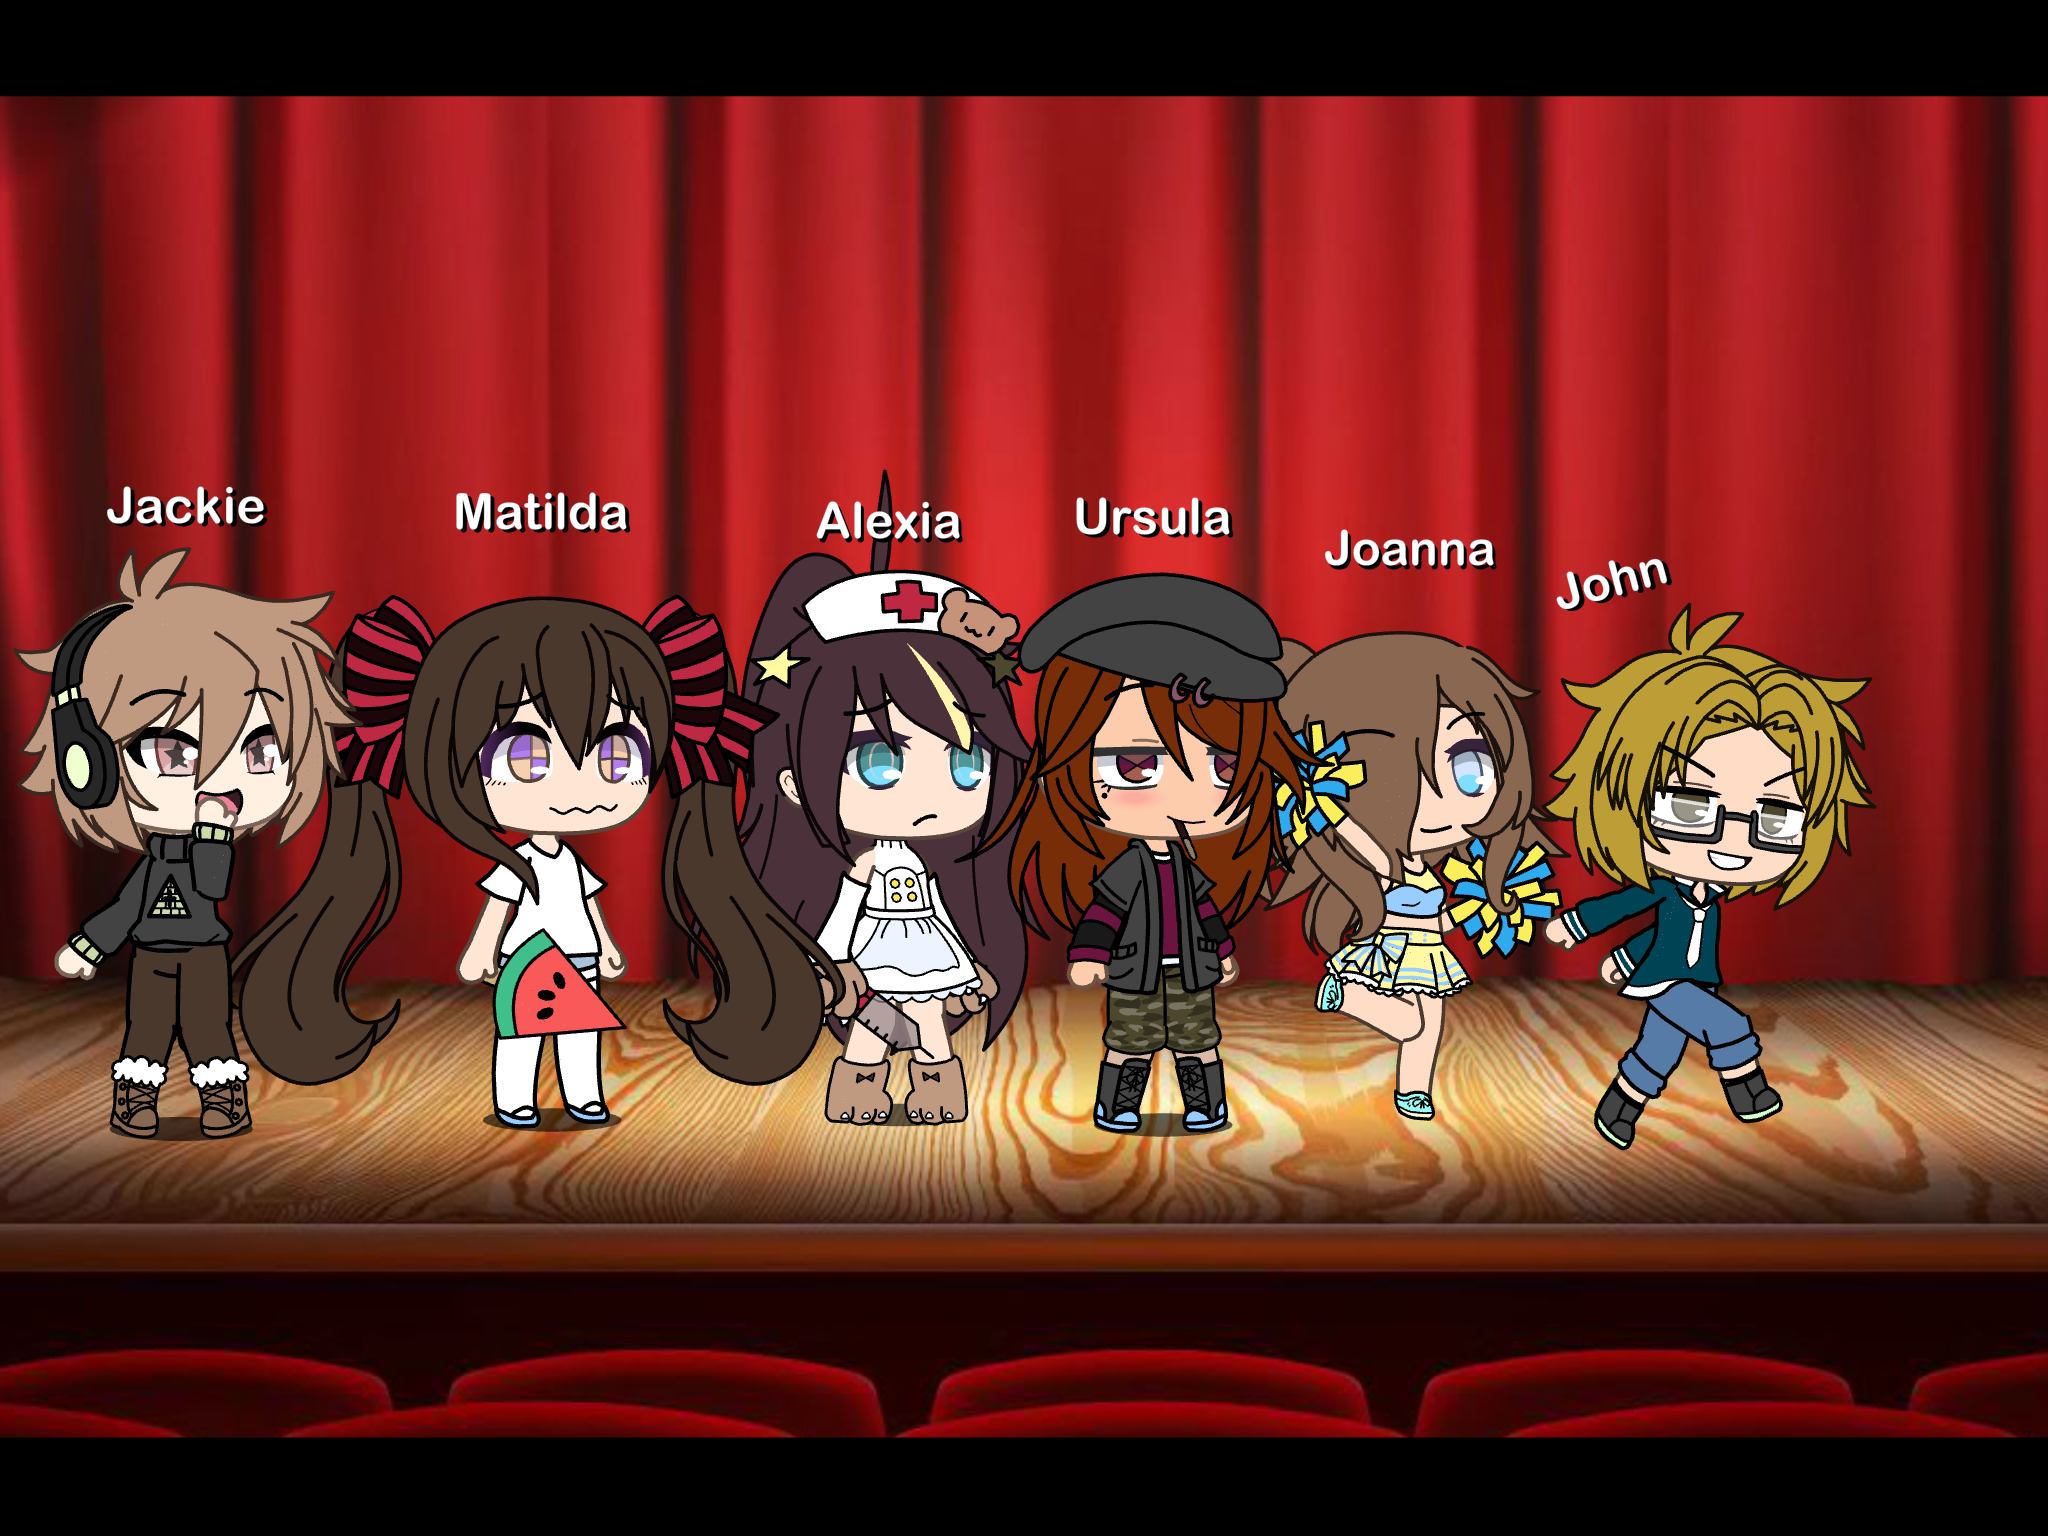 Rate me and my friends ocs for the new gacha life 2!!! : r